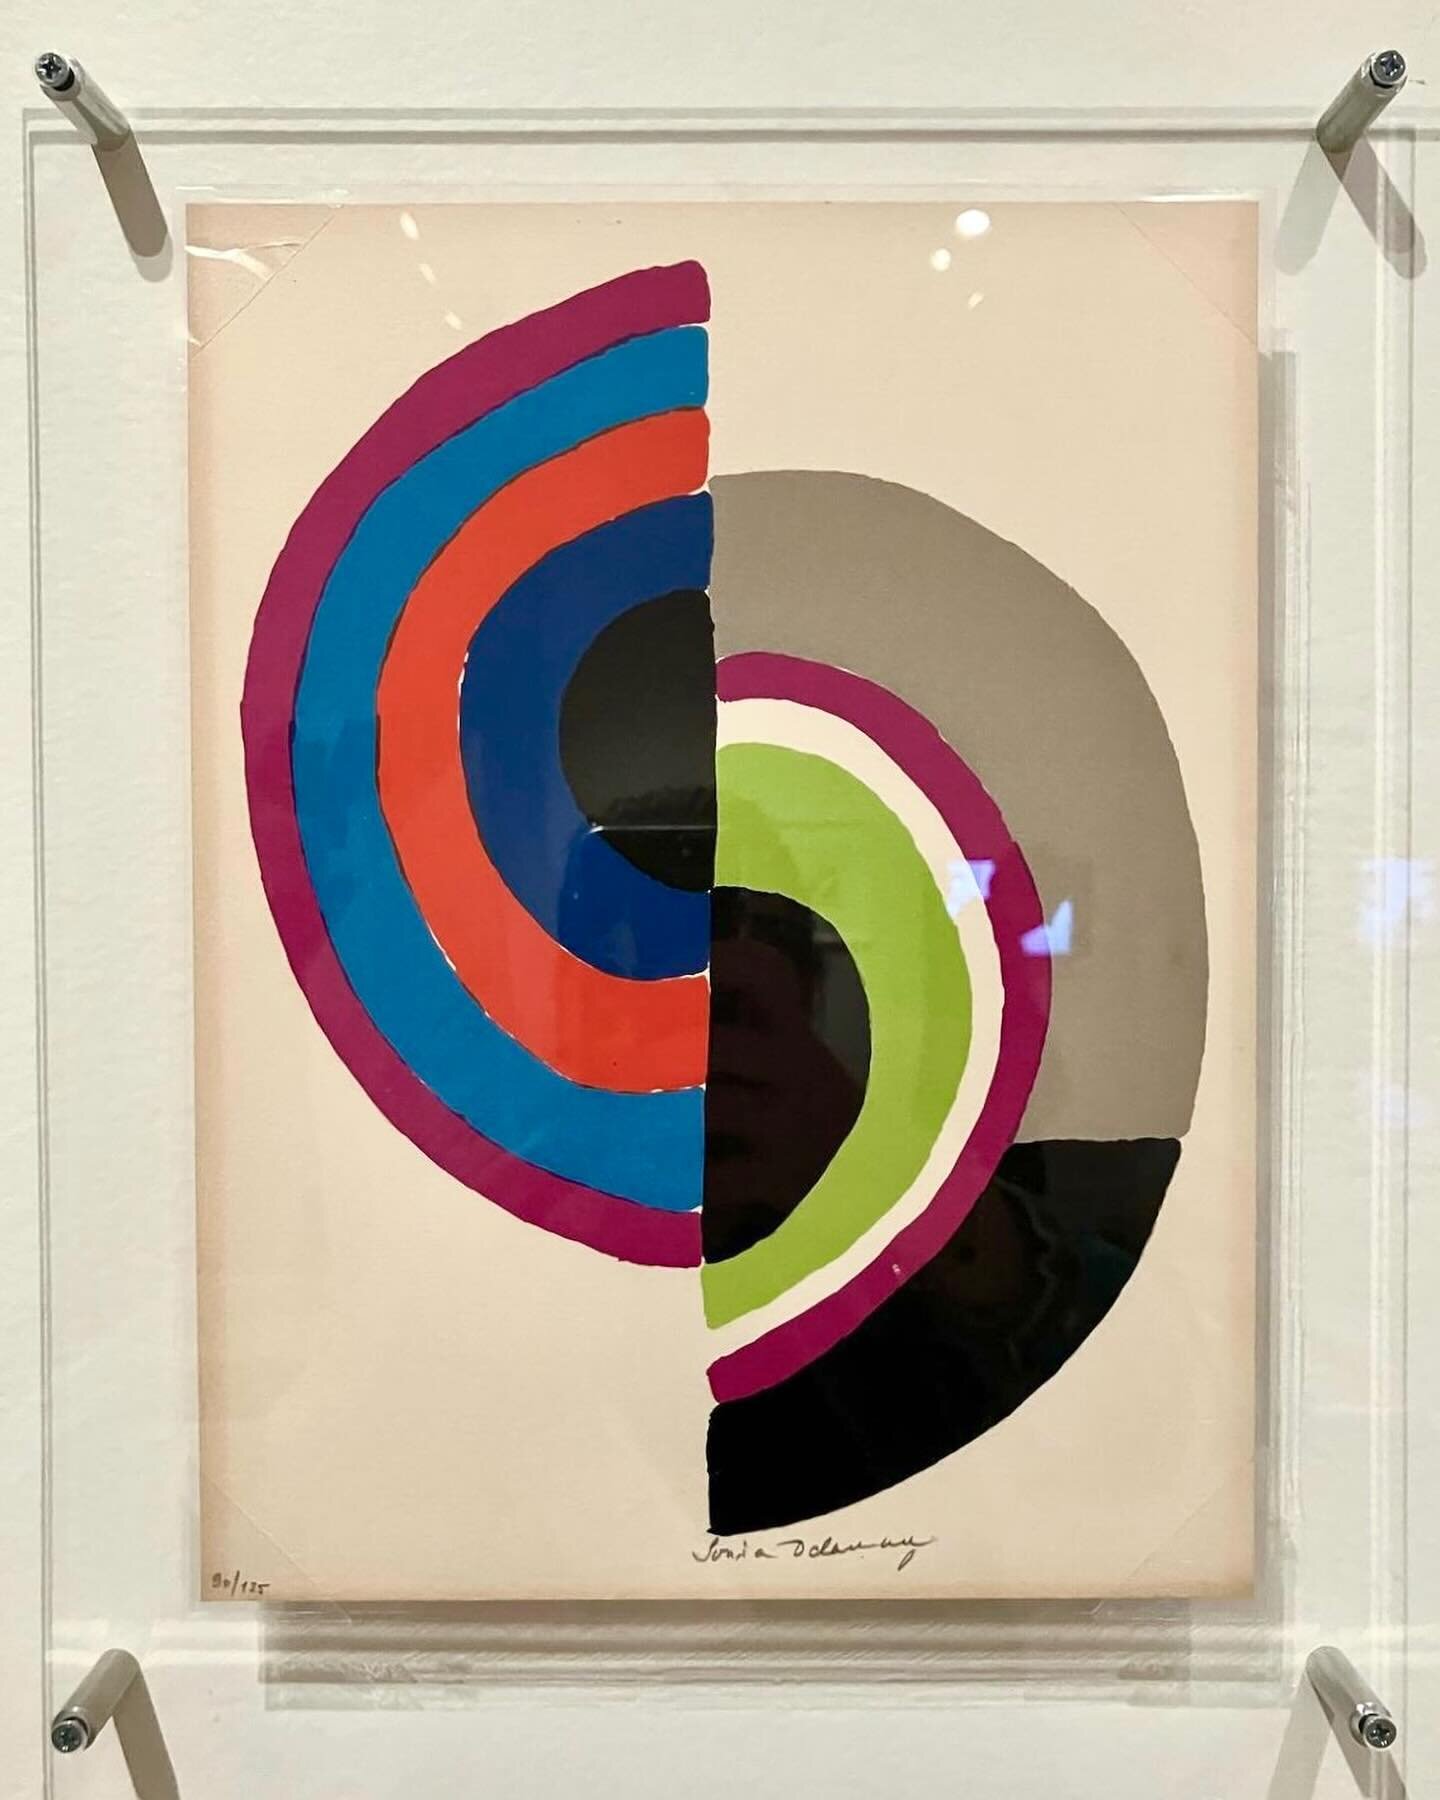 Wonderful colour and graphics by Sonia Delaunay shown at @bardgradcenter via @cristina_buckley 
 
Sonia Delaunay (1885 -1979) was born into a Ukrainian Jewish family. She created groundbreaking textiles, clothes and paintings with bold patterns in vi